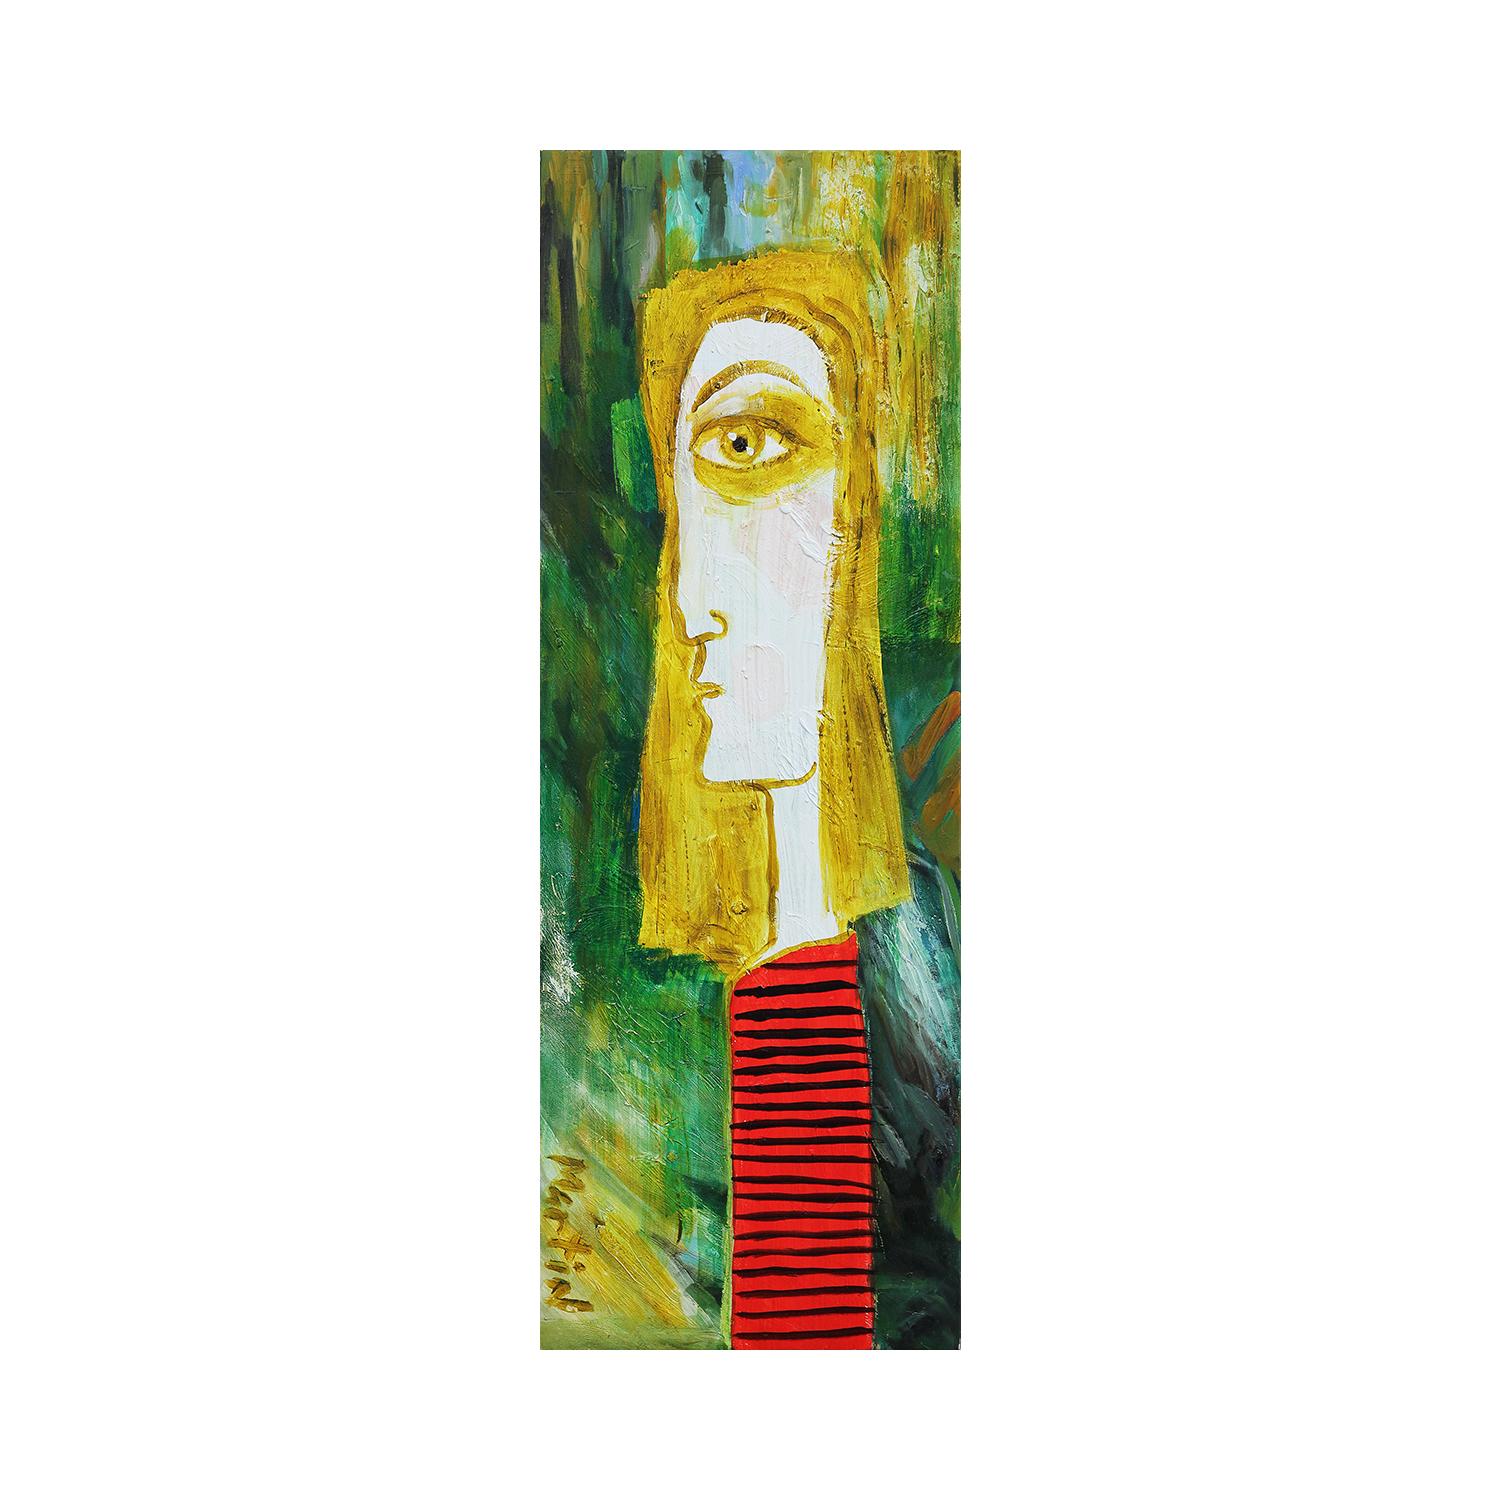 Larry Martin Figurative Painting - Contemporary Green, Yellow, and Red Longitudinal Abstract Female Portrait 